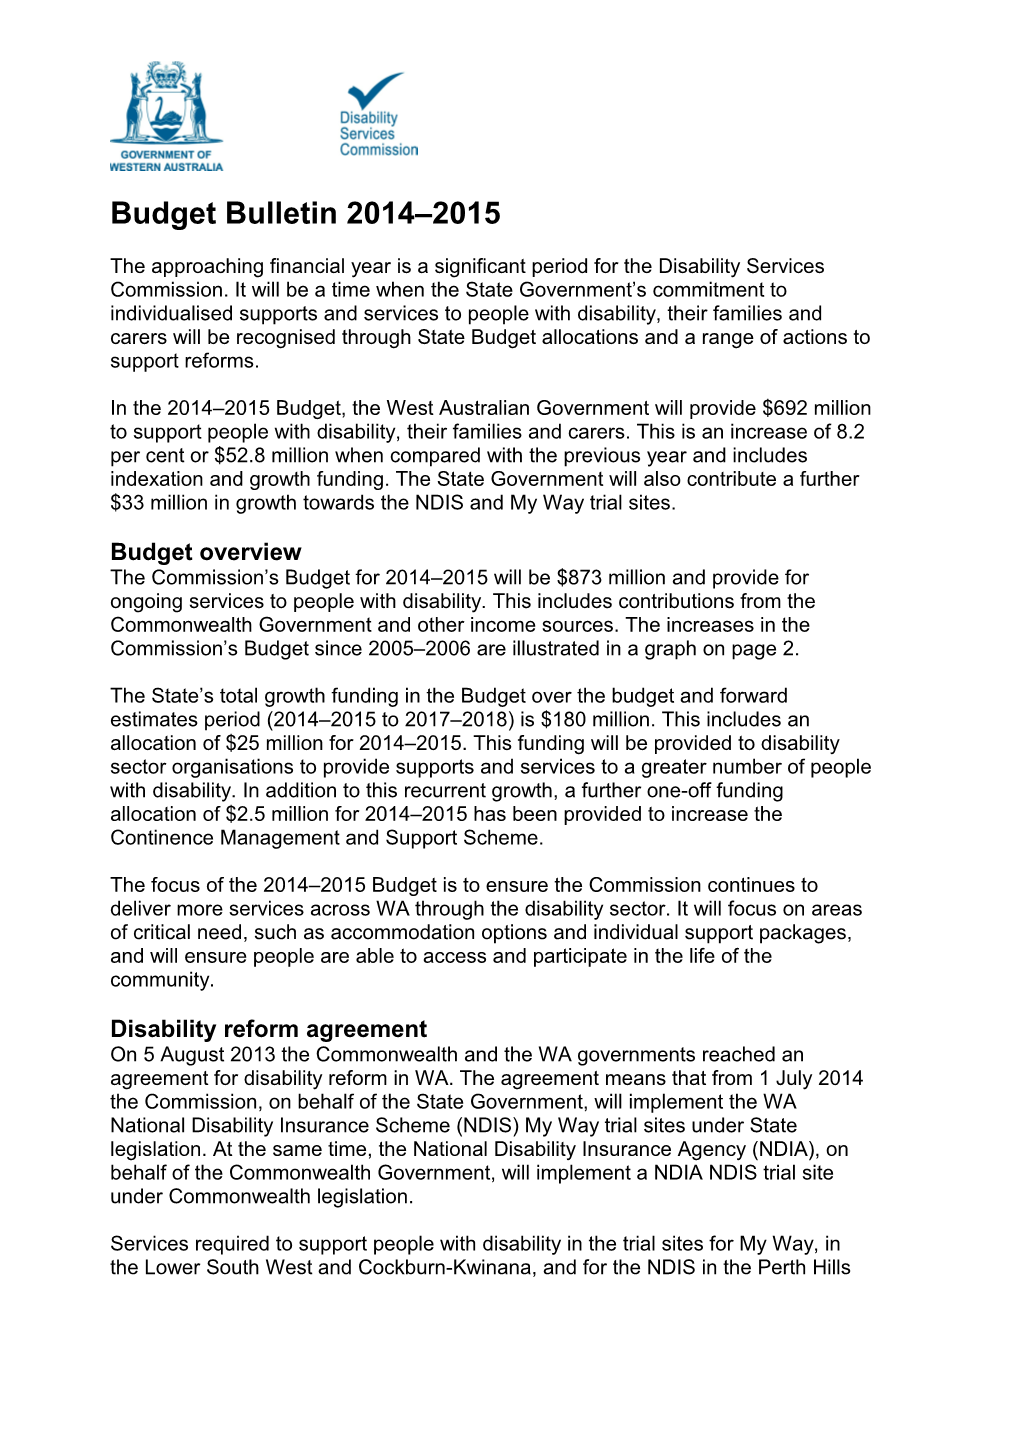 Disability Services Commission Budget Bulletin 2014 2015